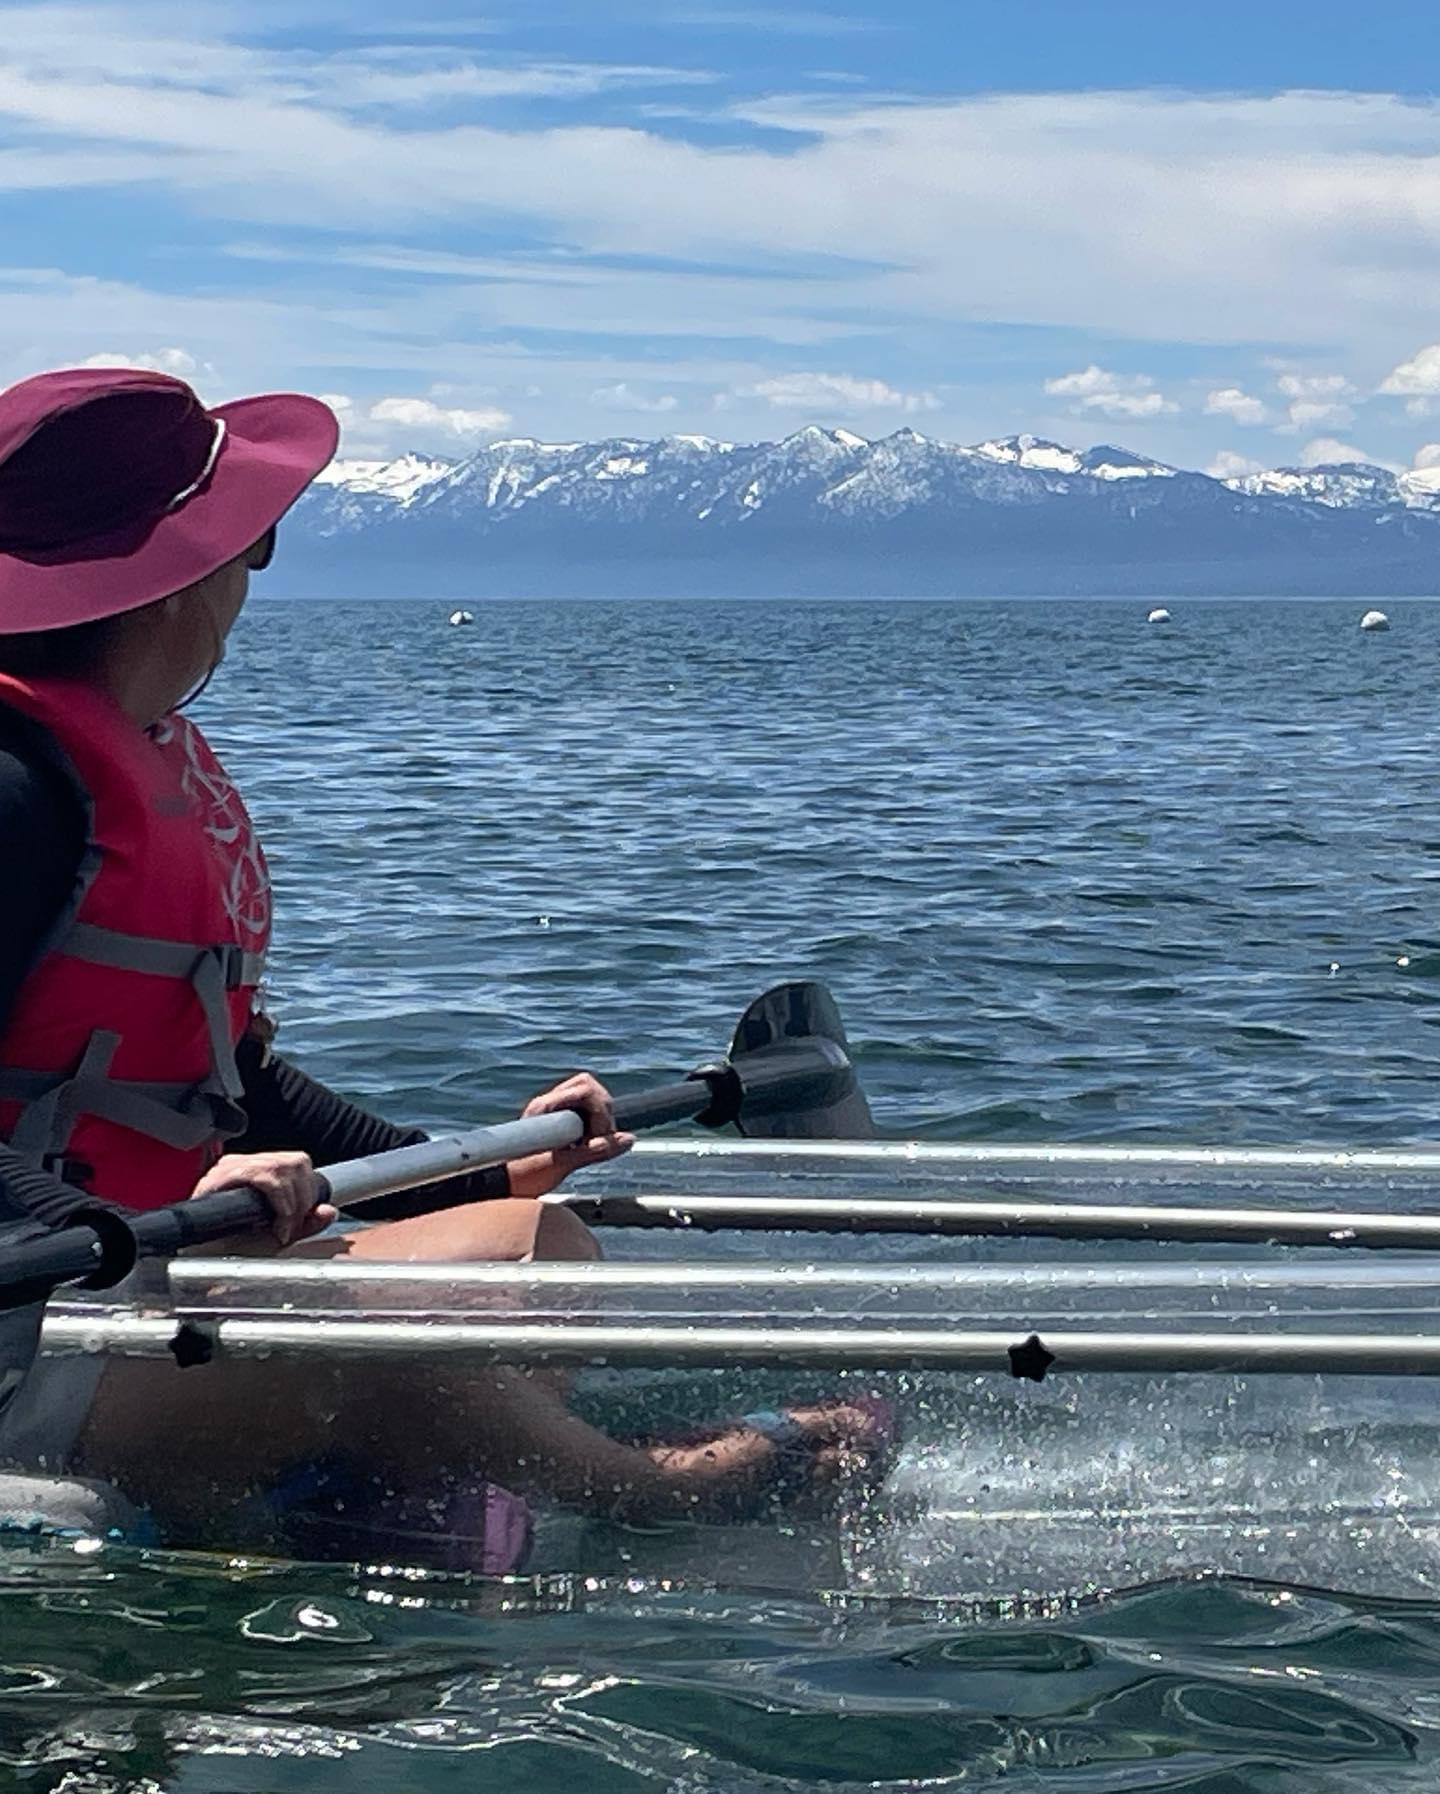 Me sitting in a kayak on Lake Tahoe with snow covered mountains in the background.